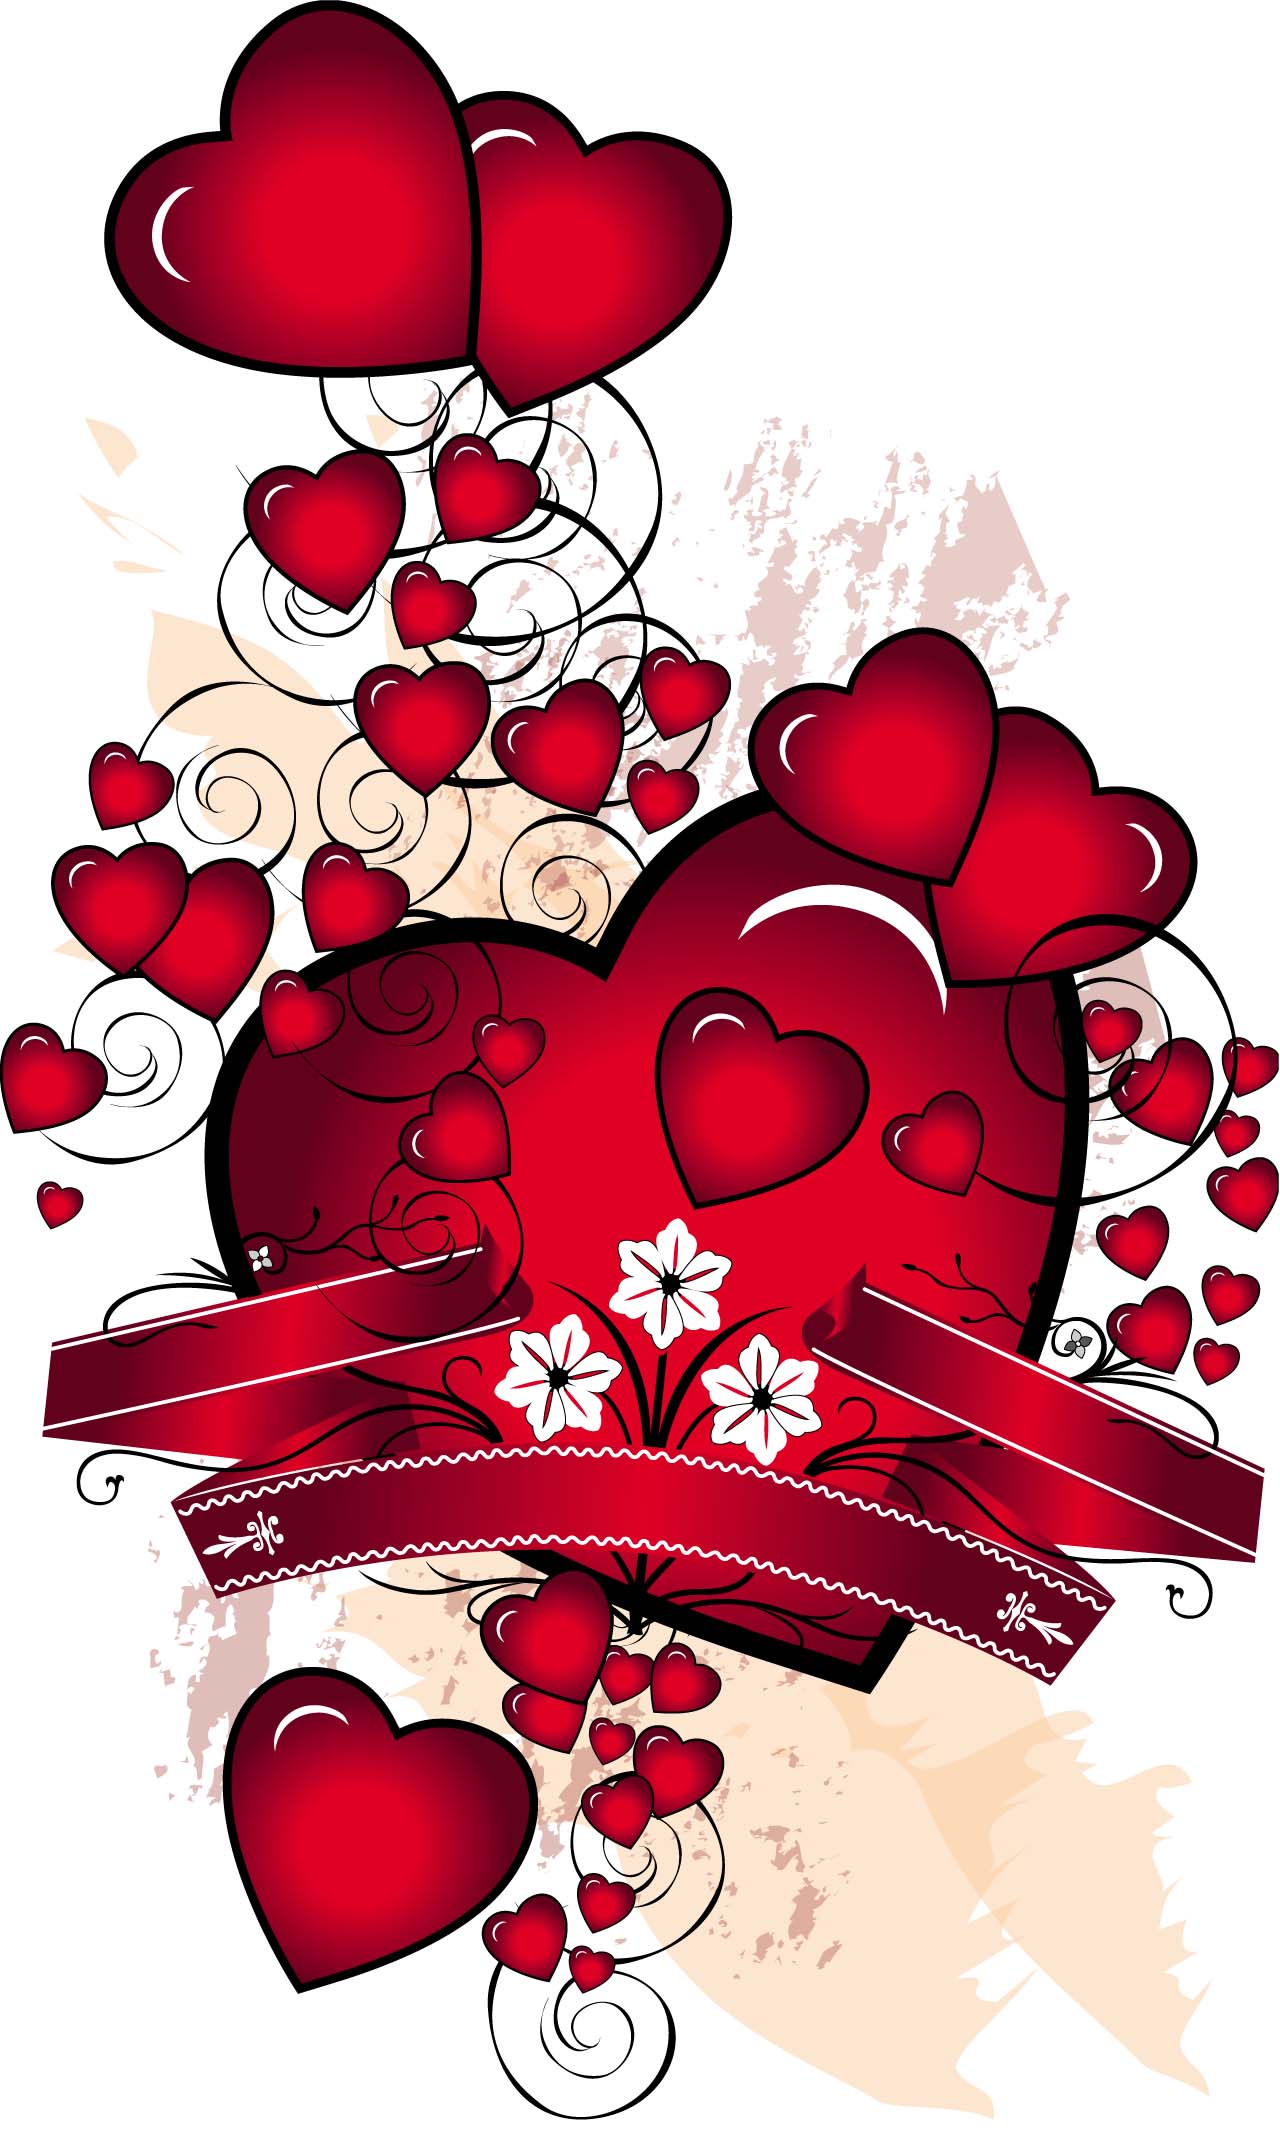 Red hearts and ribbons vector card | Free download